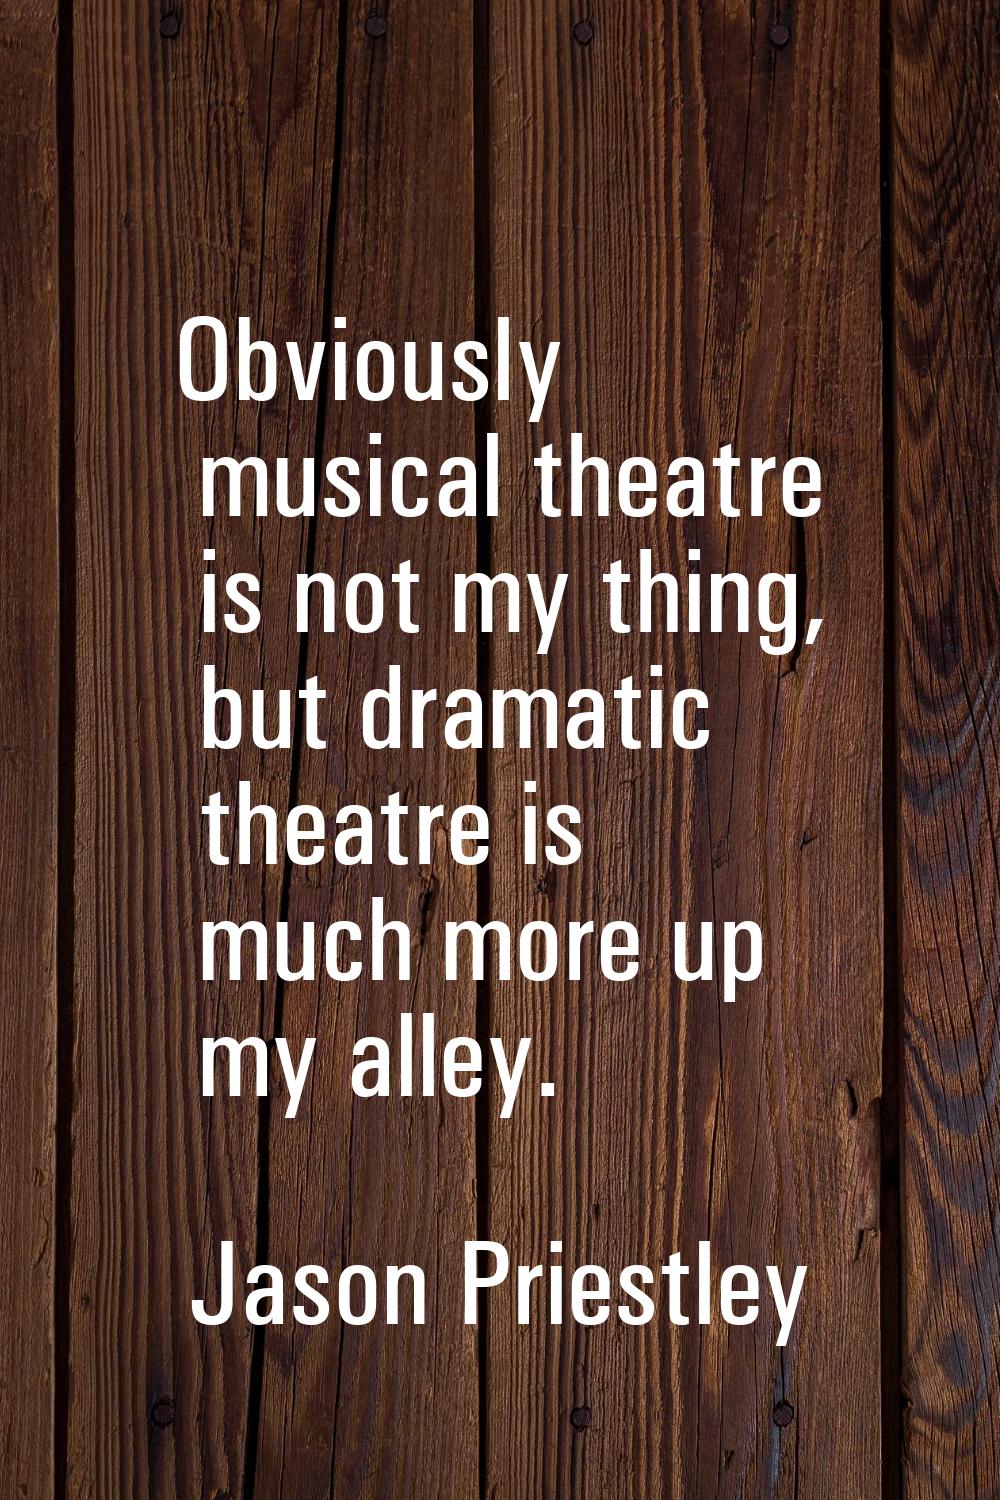 Obviously musical theatre is not my thing, but dramatic theatre is much more up my alley.